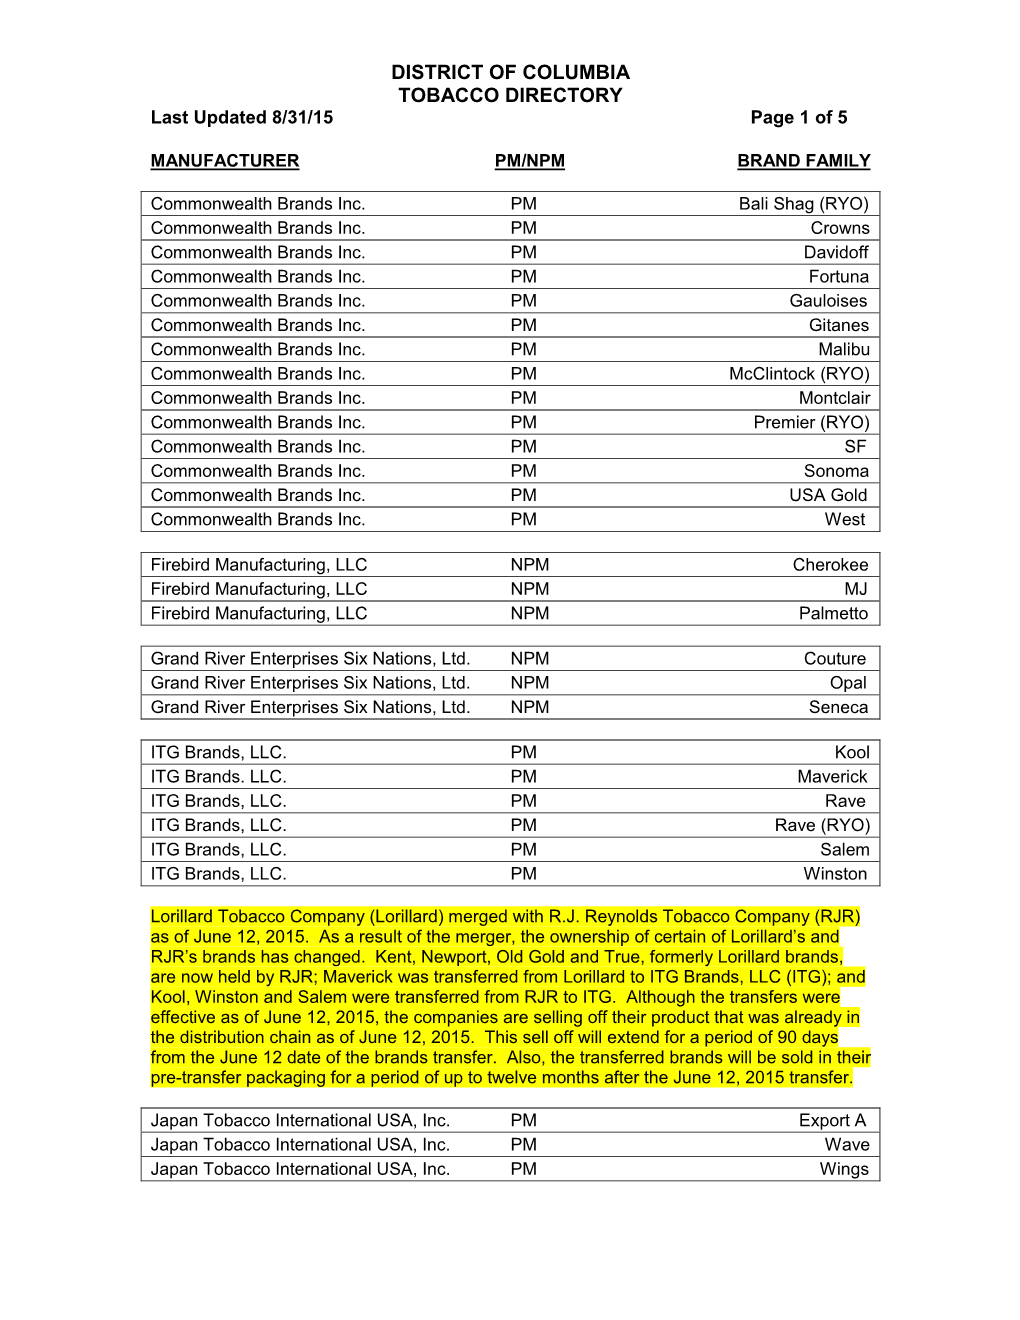 DISTRICT of COLUMBIA TOBACCO DIRECTORY Last Updated 8/31/15 Page 1 of 5